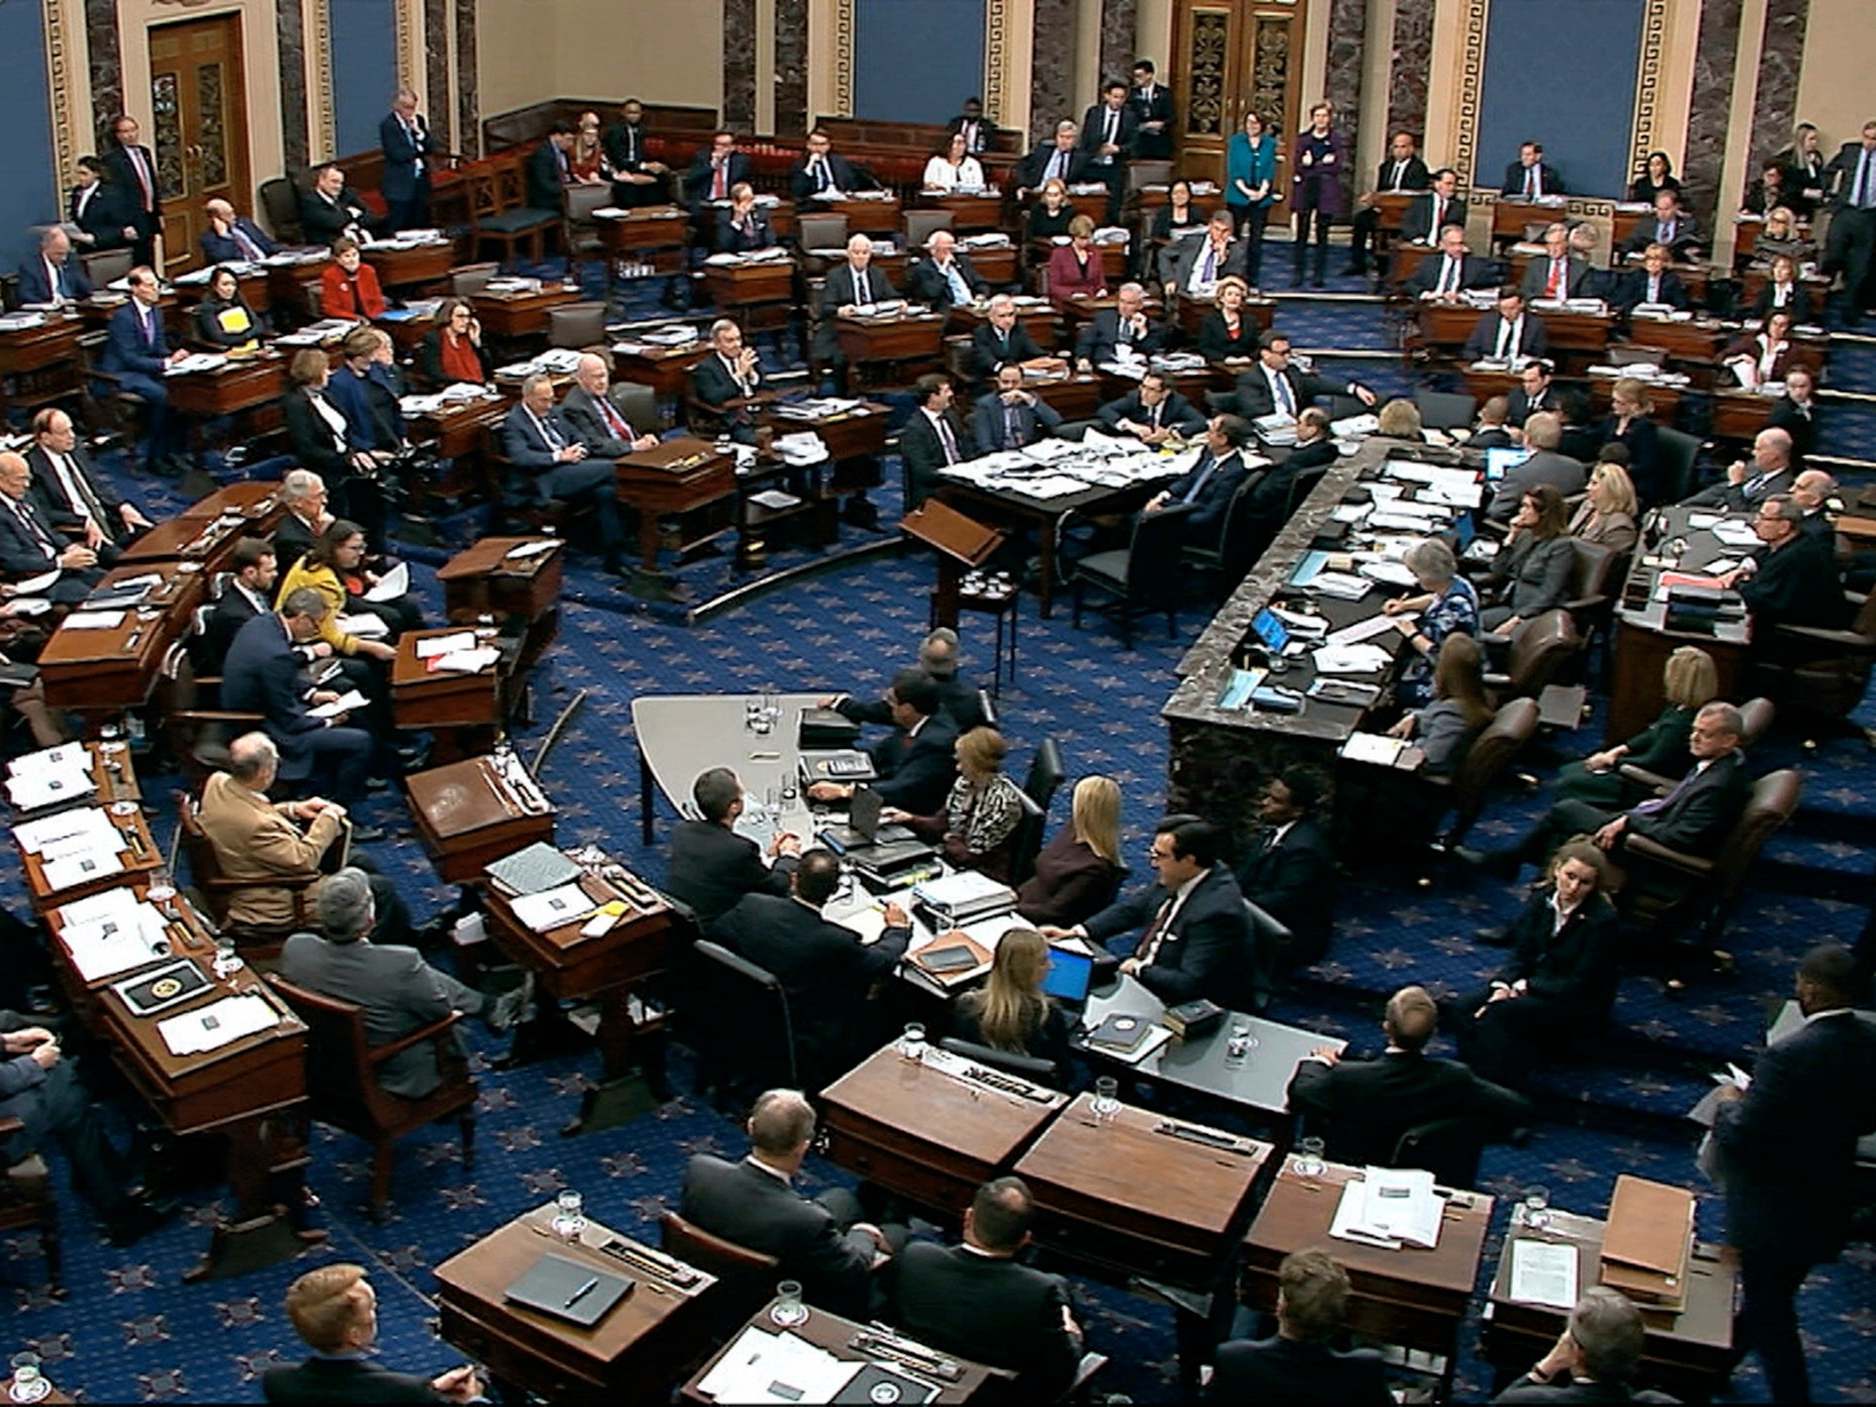 Senators vote on approving the rules for the impeachment trial